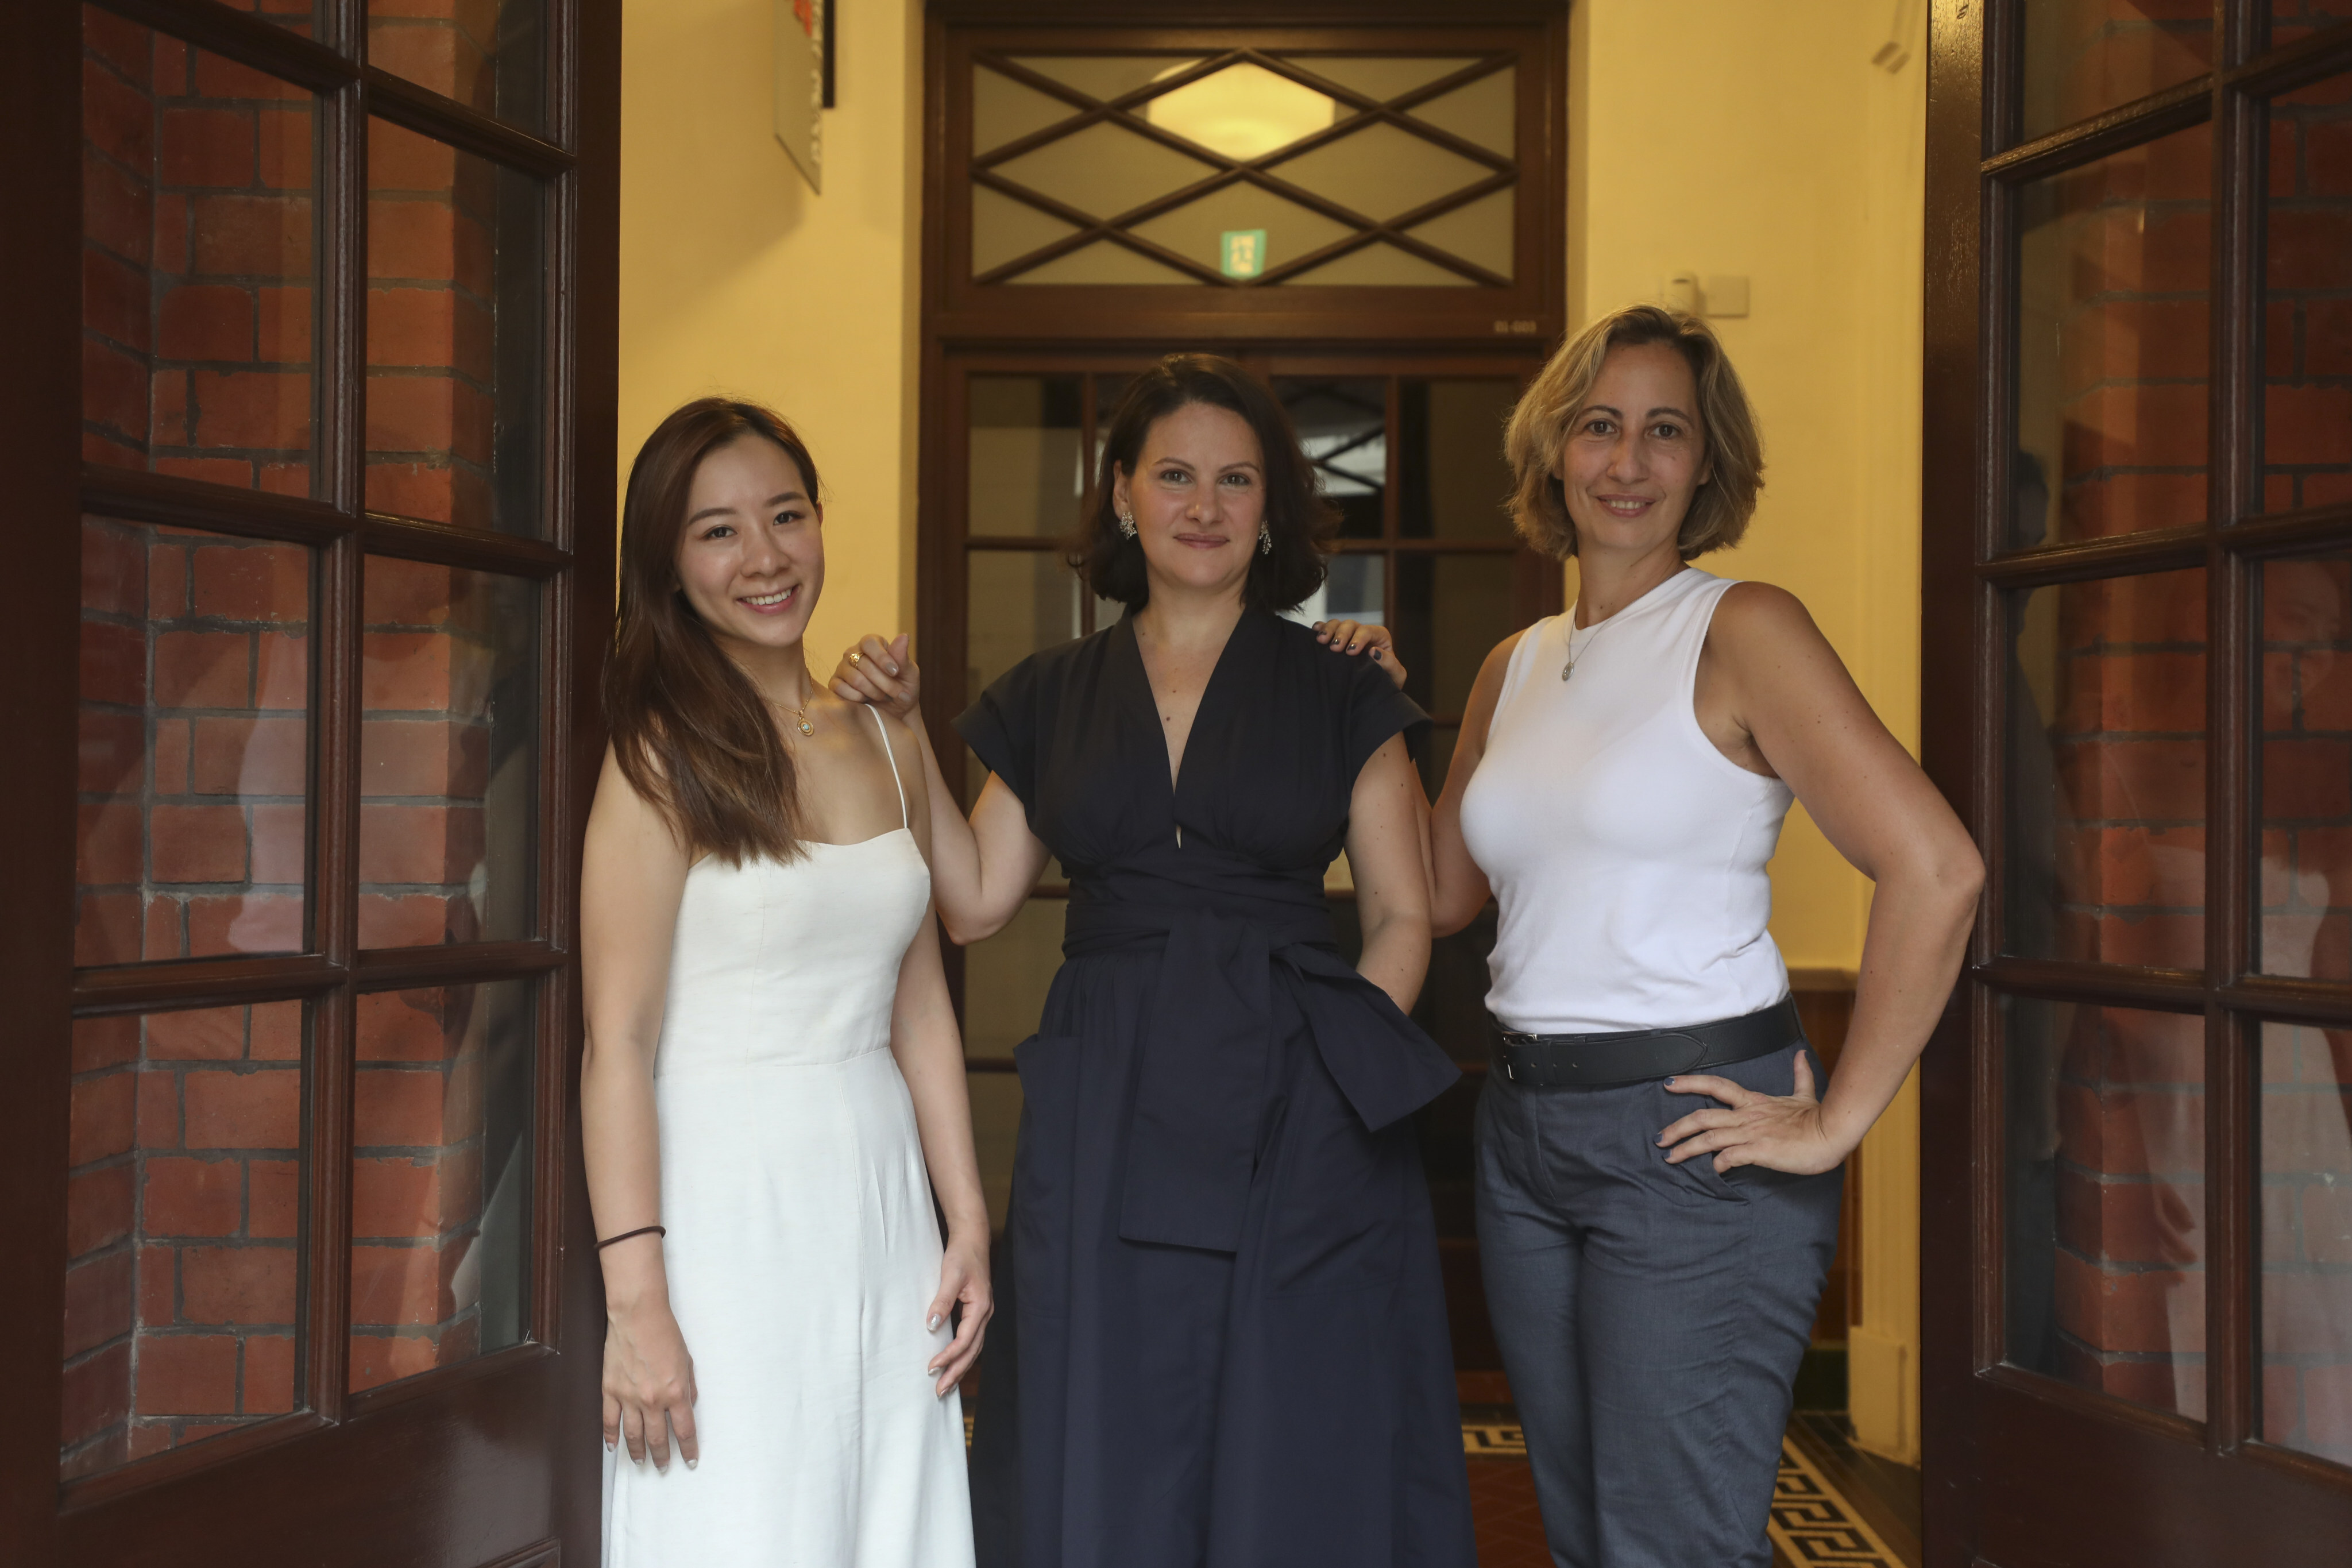 OM founders Gigi Ngan (left) and Anca Griffiths (centre) photographed with Emilie Berthet Clairet. OM addresses women’s health issues, which modern medicine largely ignores thanks to male-centric medical research. Photo: Xiaomei Chen